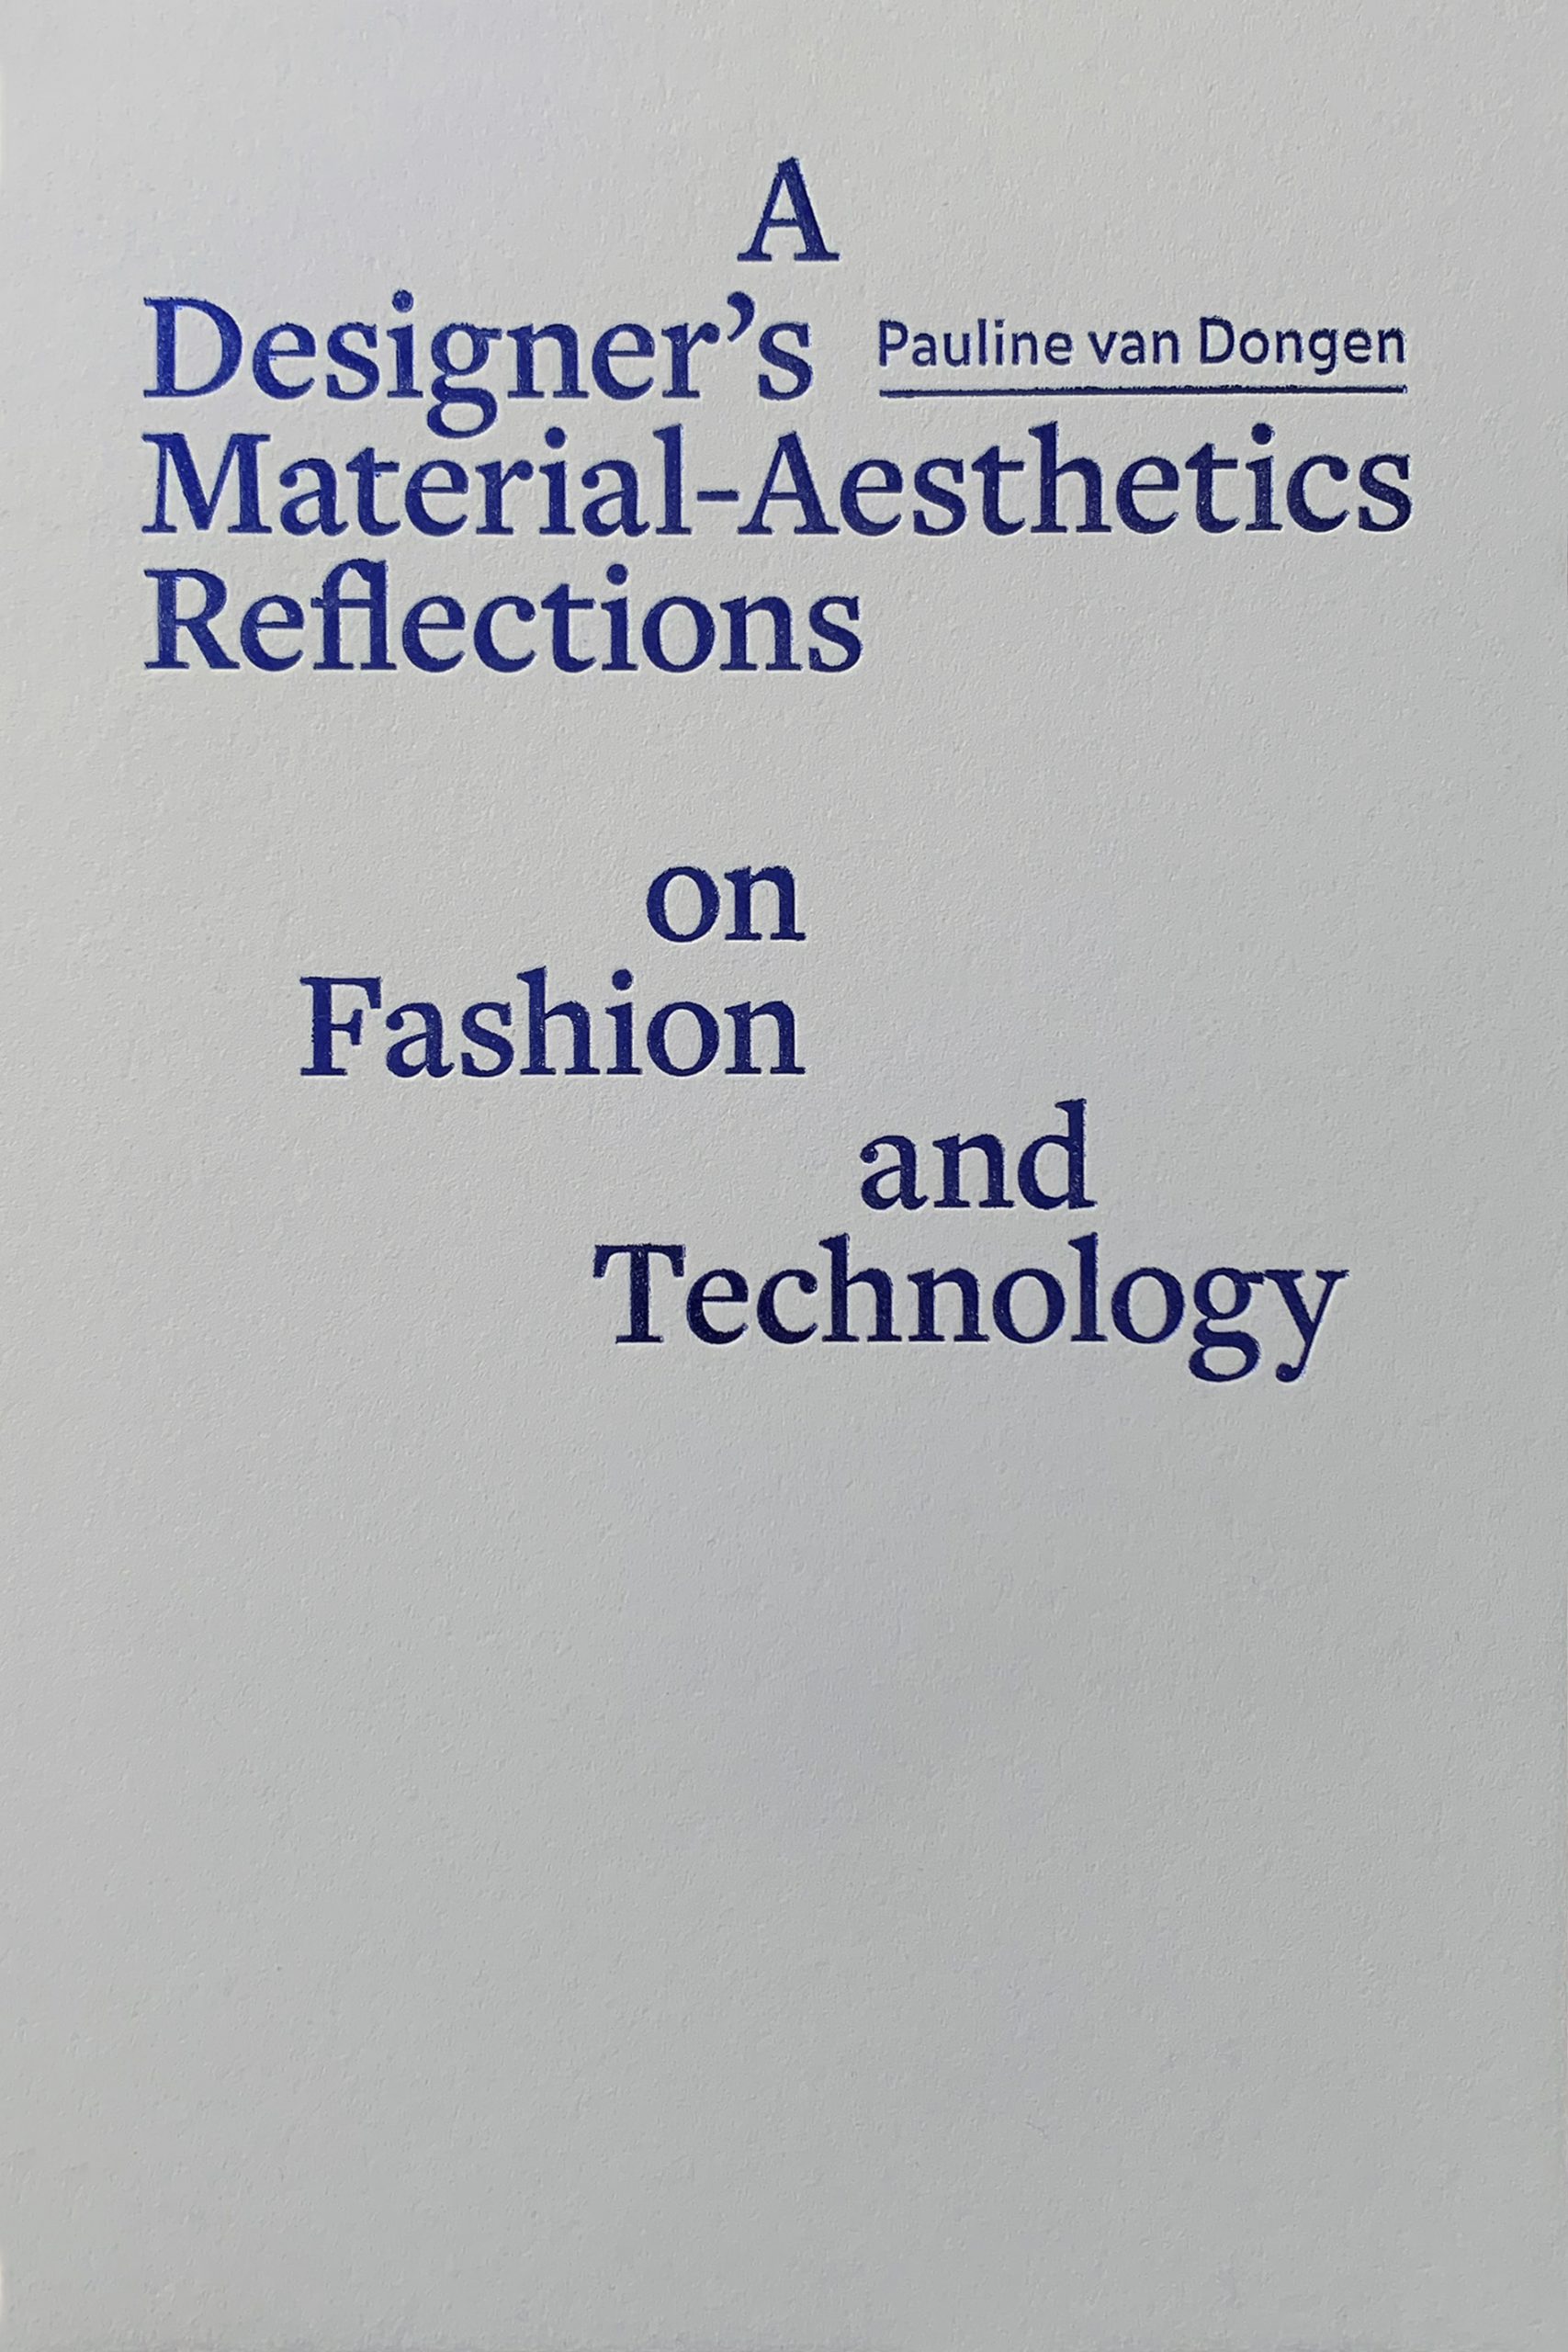 A Designer’s Material-Aesthetics Reflections on Fashion and Technology